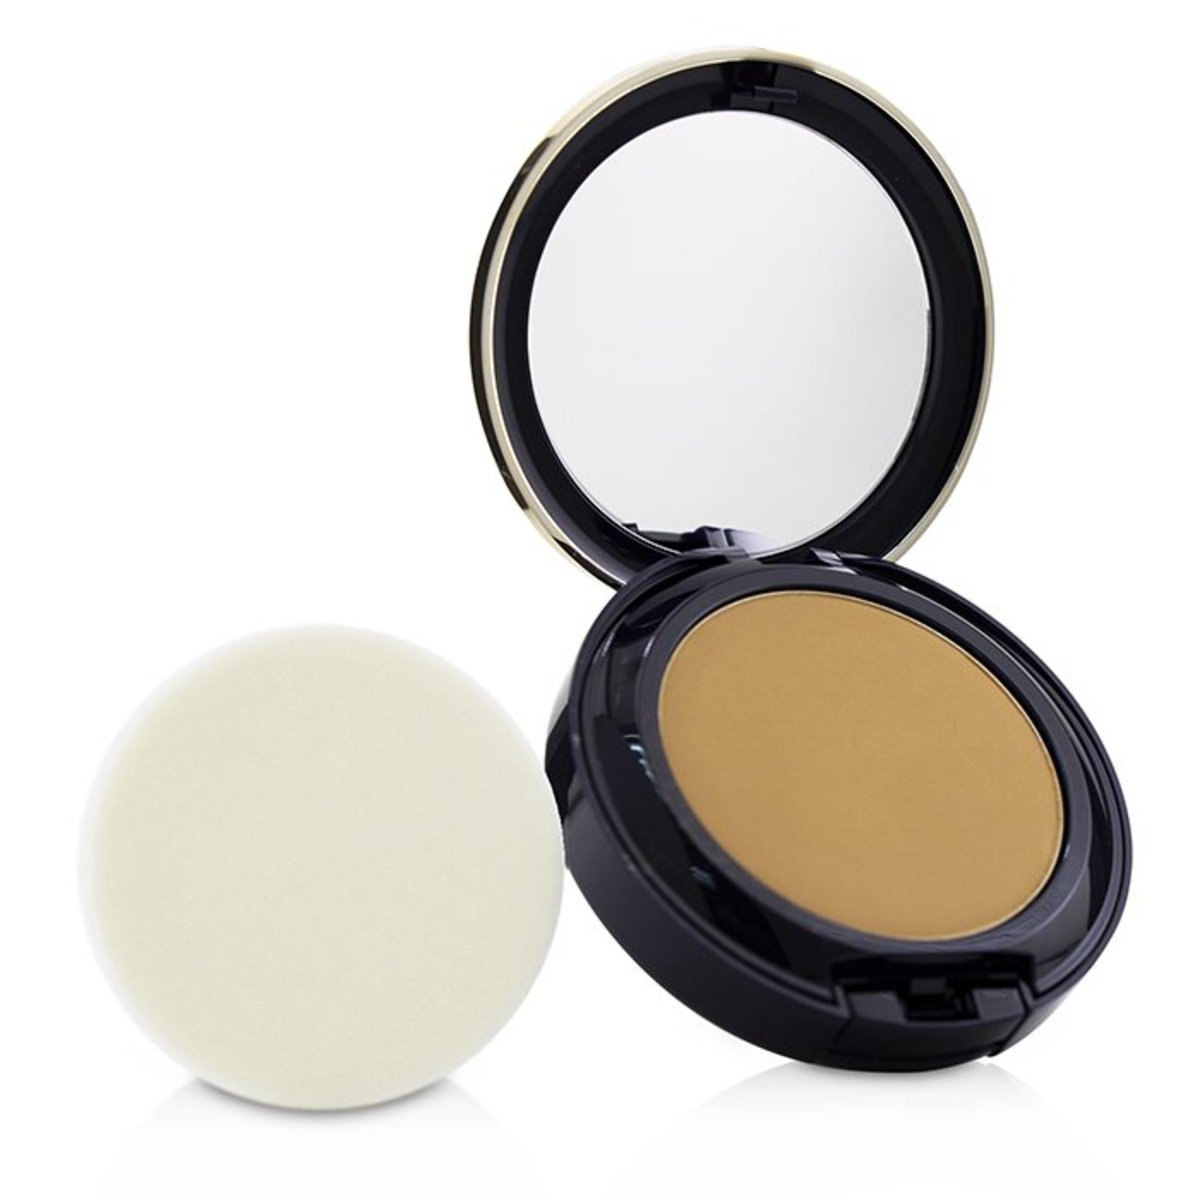 Double Wear Stay In Place Matte Powder Foundation SPF 10 - # 4N2 Spiced Sand 12g/0.42oz - [Parallel Import Product]